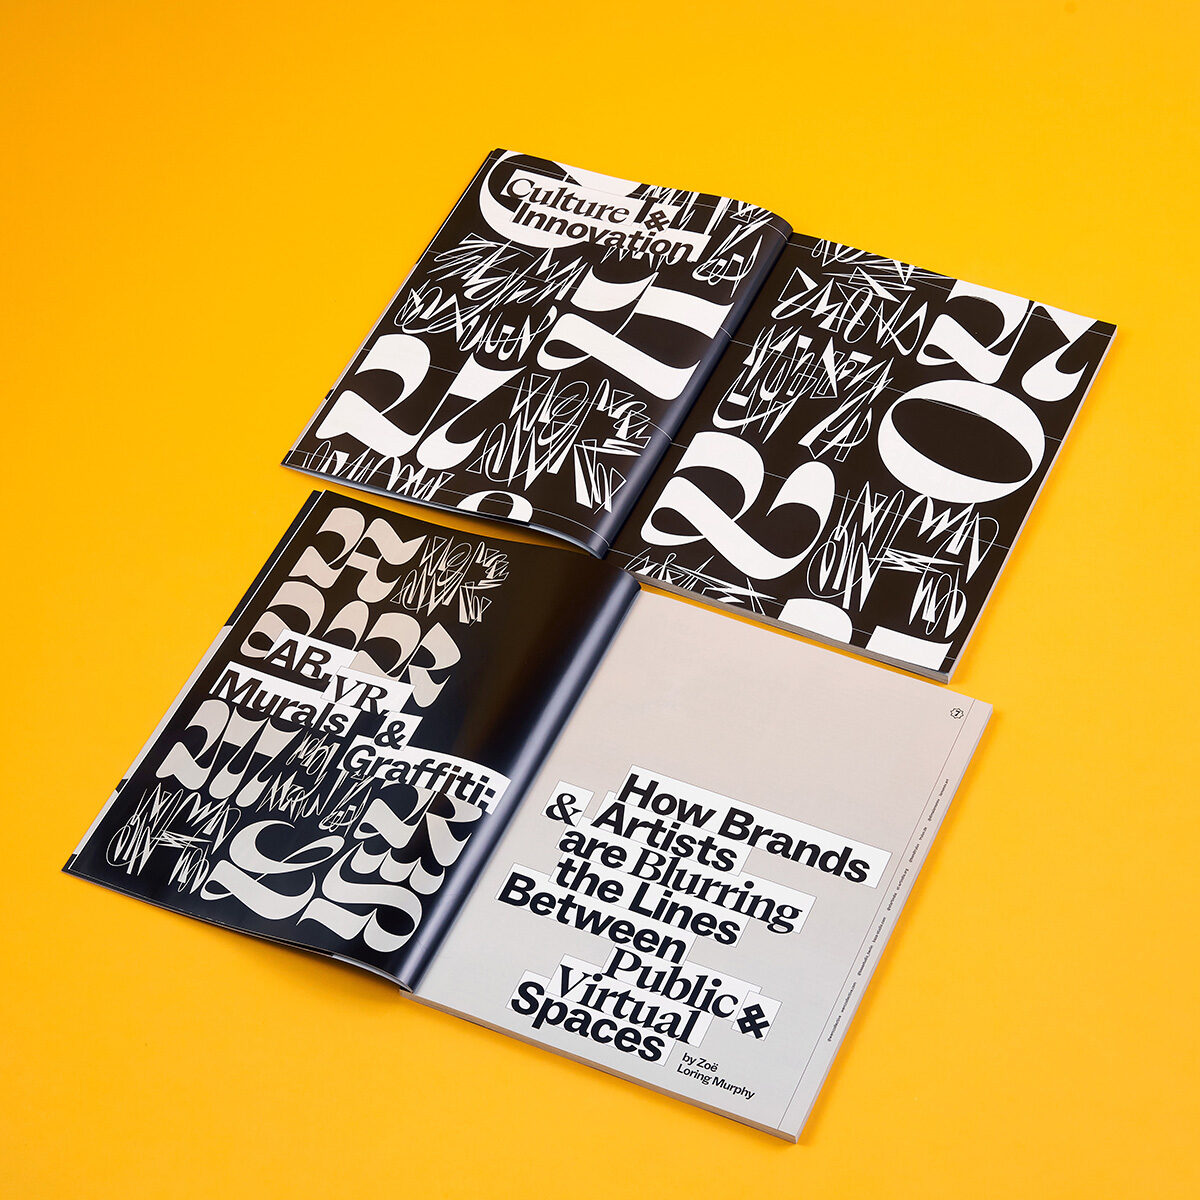 TYPEONE issue 03 – Culture & Innovation 